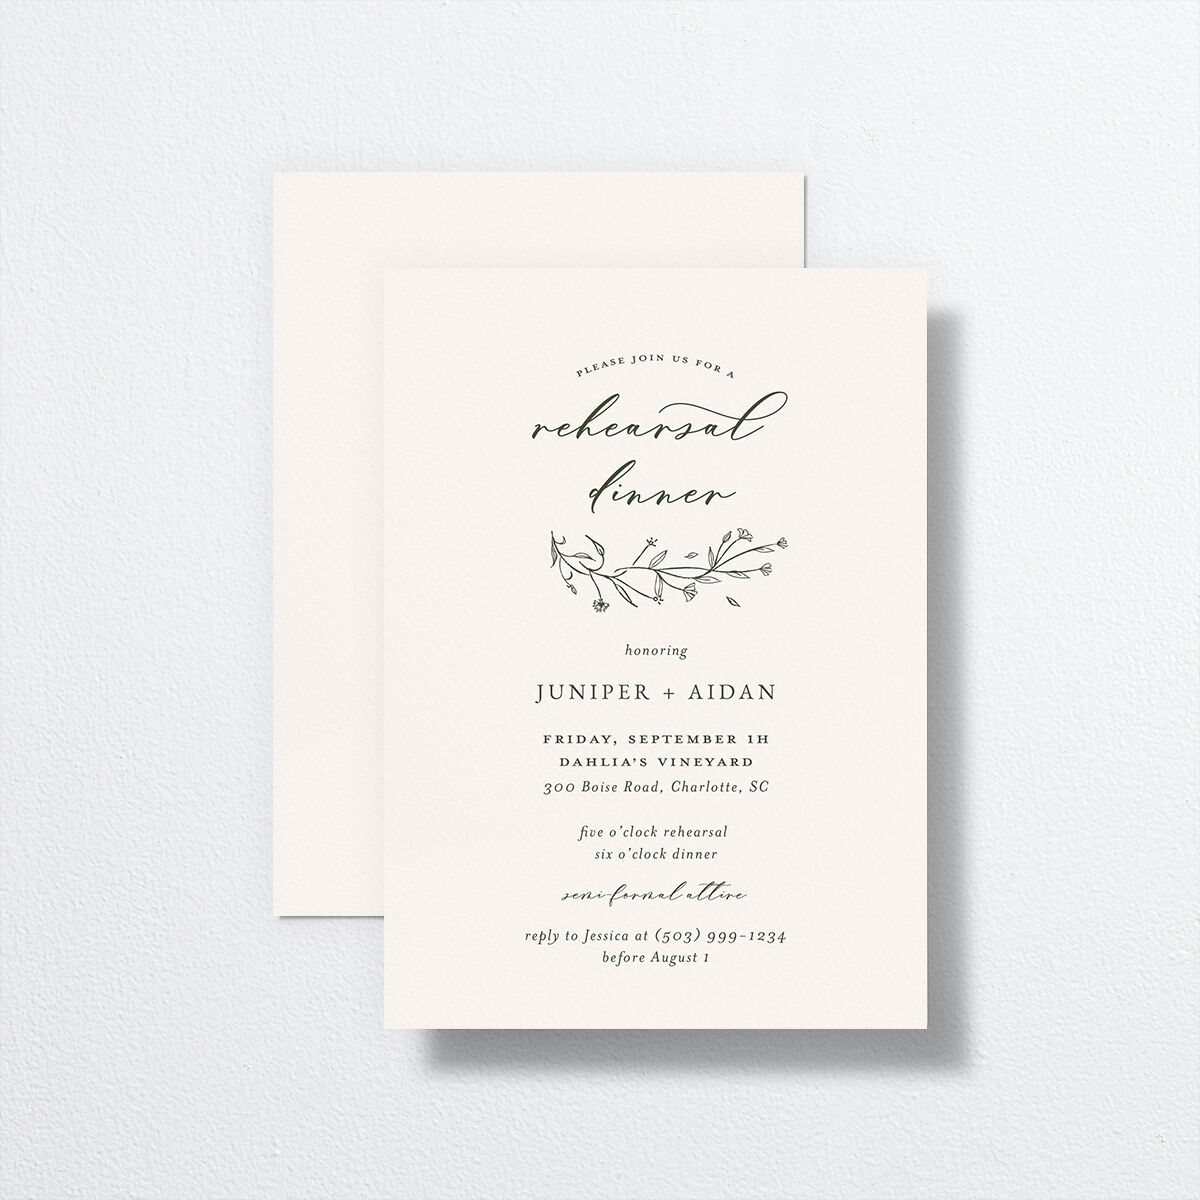 Gilded Monogram Rehearsal Dinner Invitations front-and-back in green